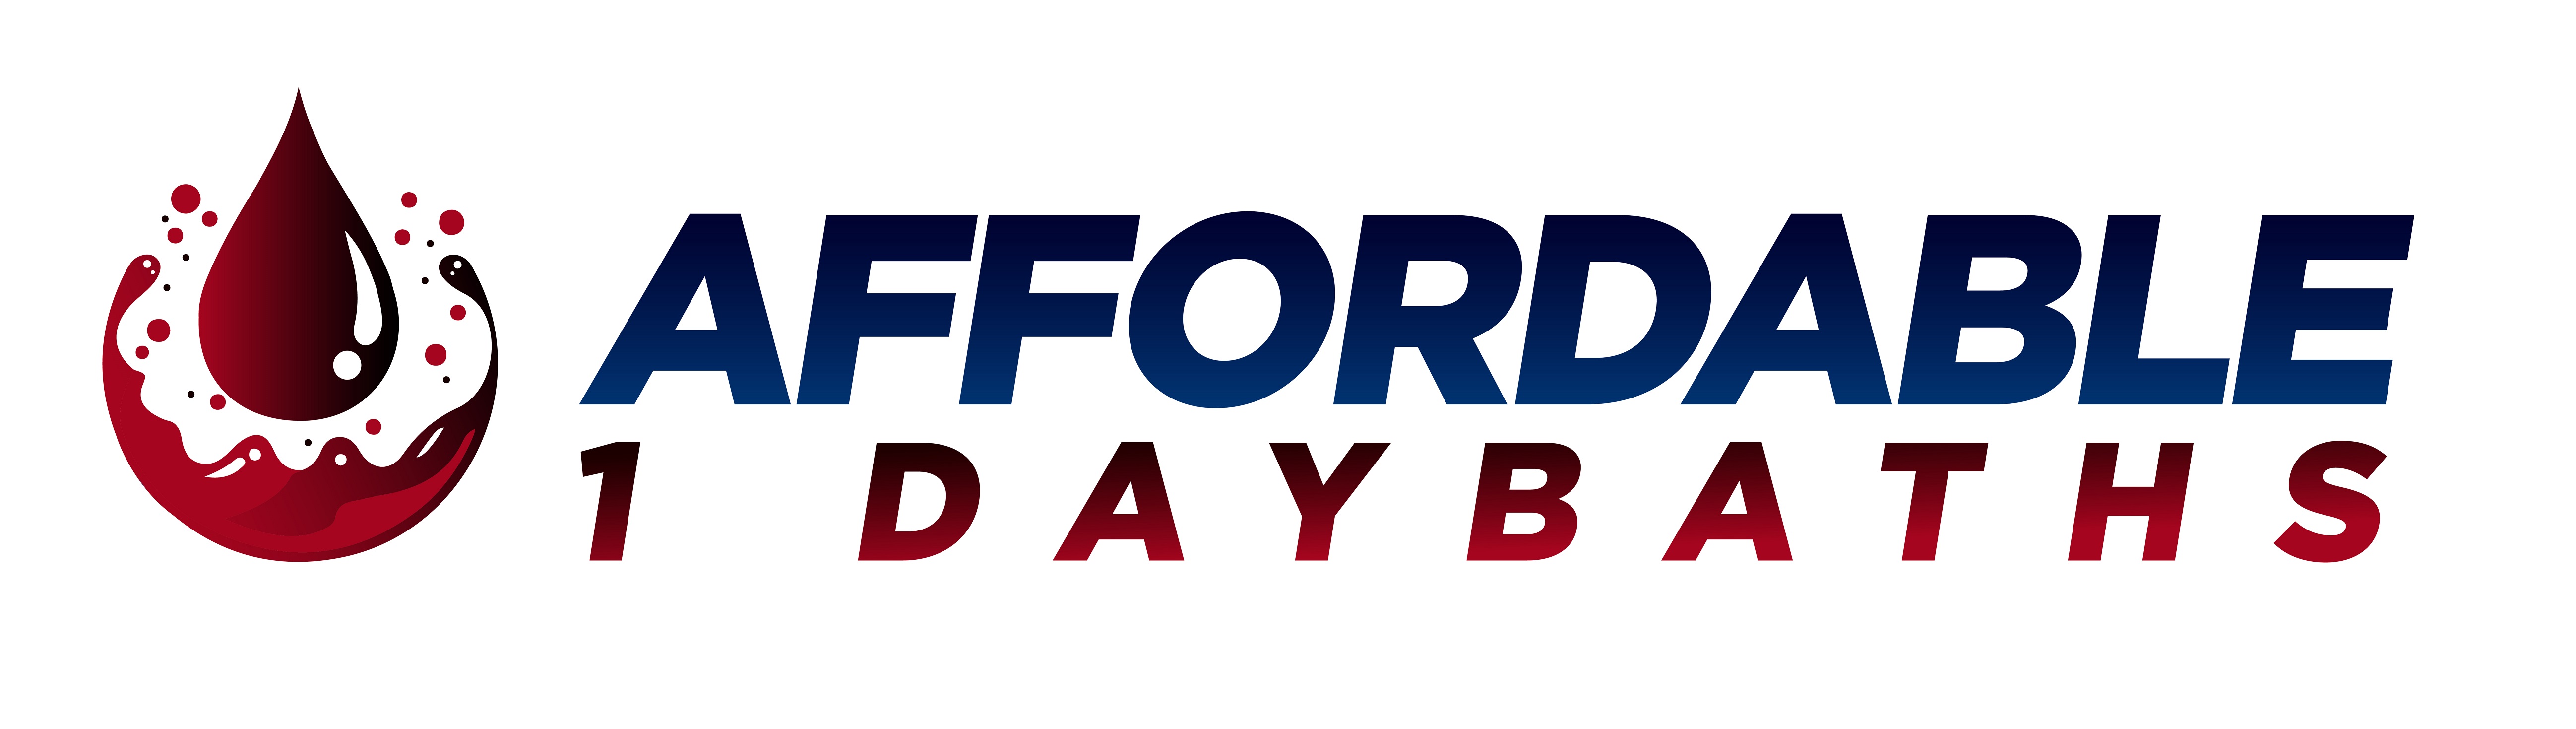 Red and blue text logo that reads: Affordable 1 Day Baths